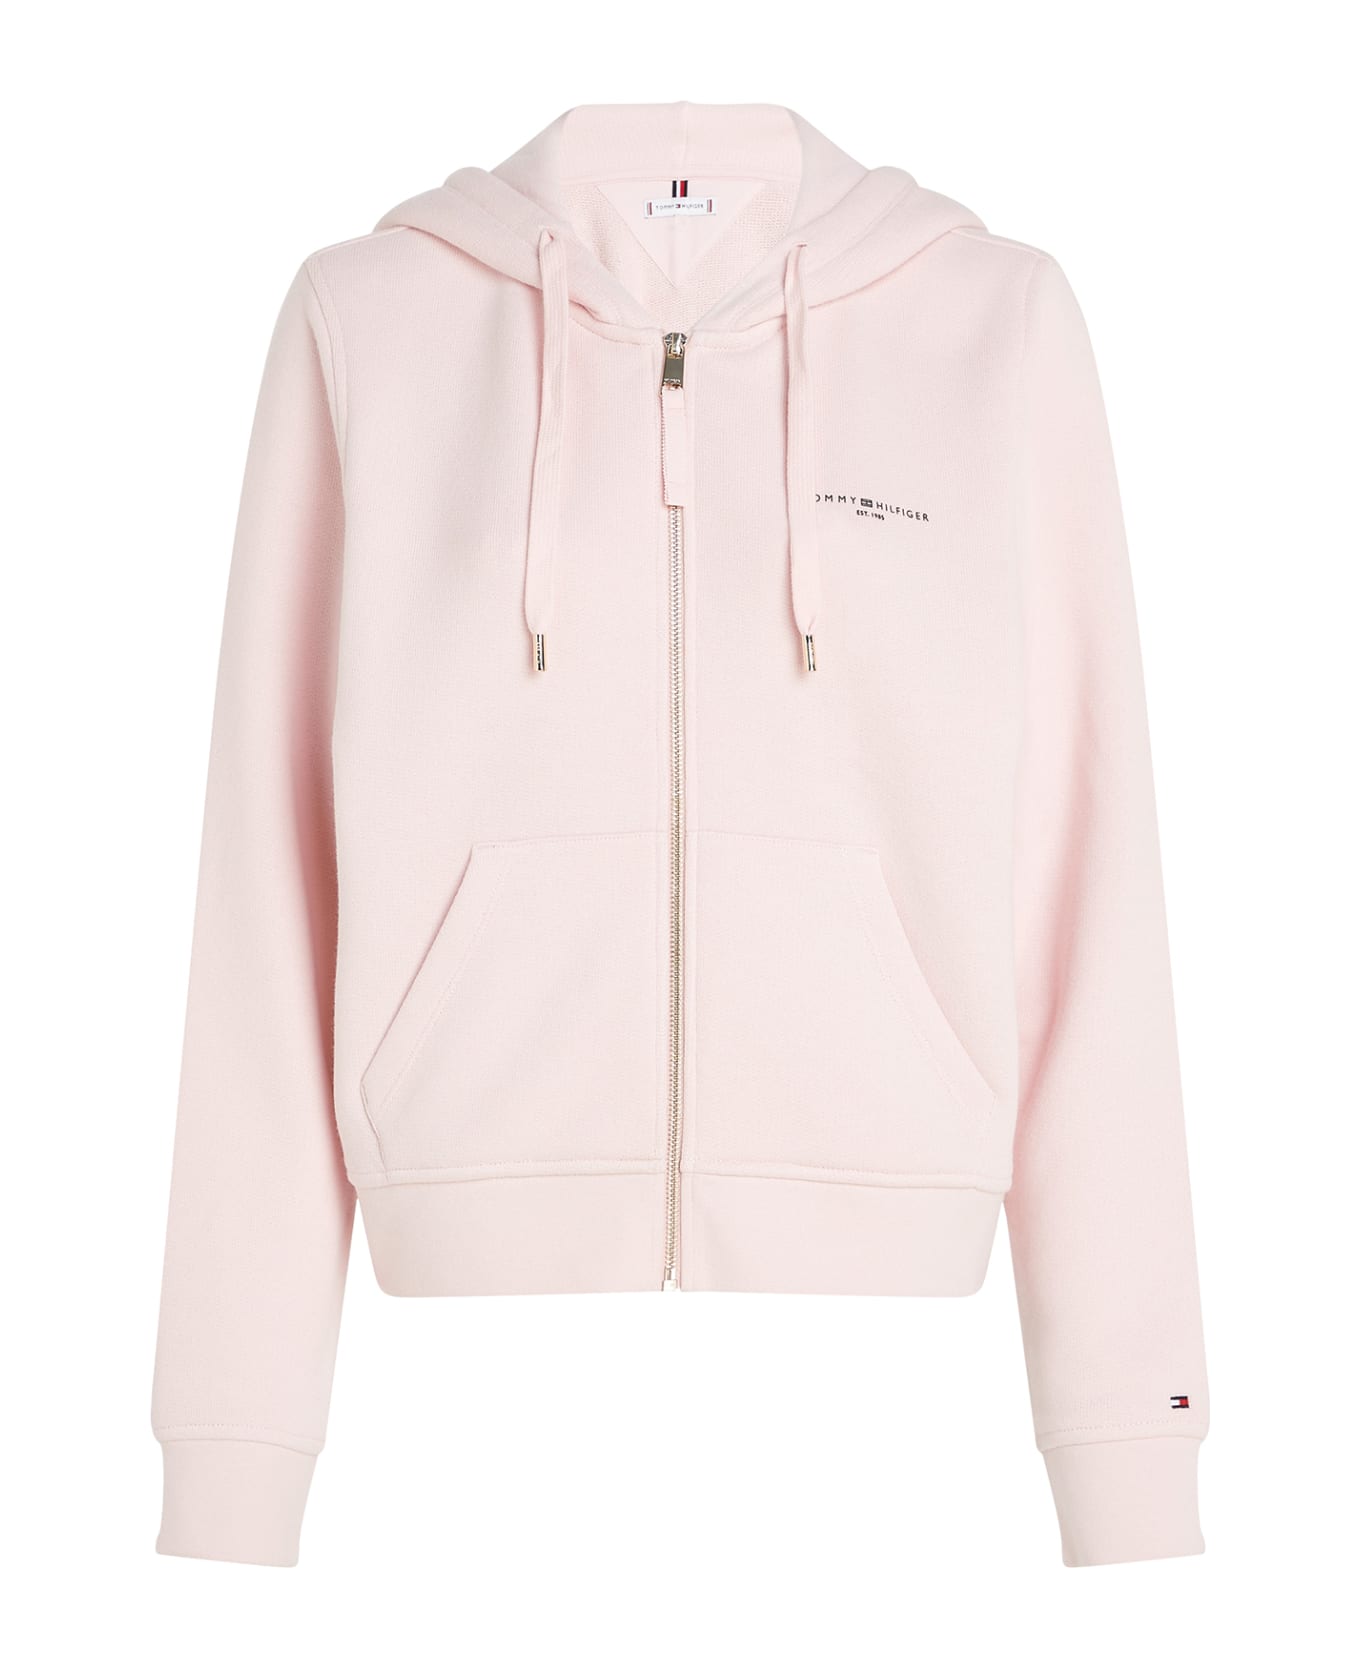 Tommy Hilfiger Pink Sweatshirt With Zip And Hood - WHIMSY PINK ジャケット